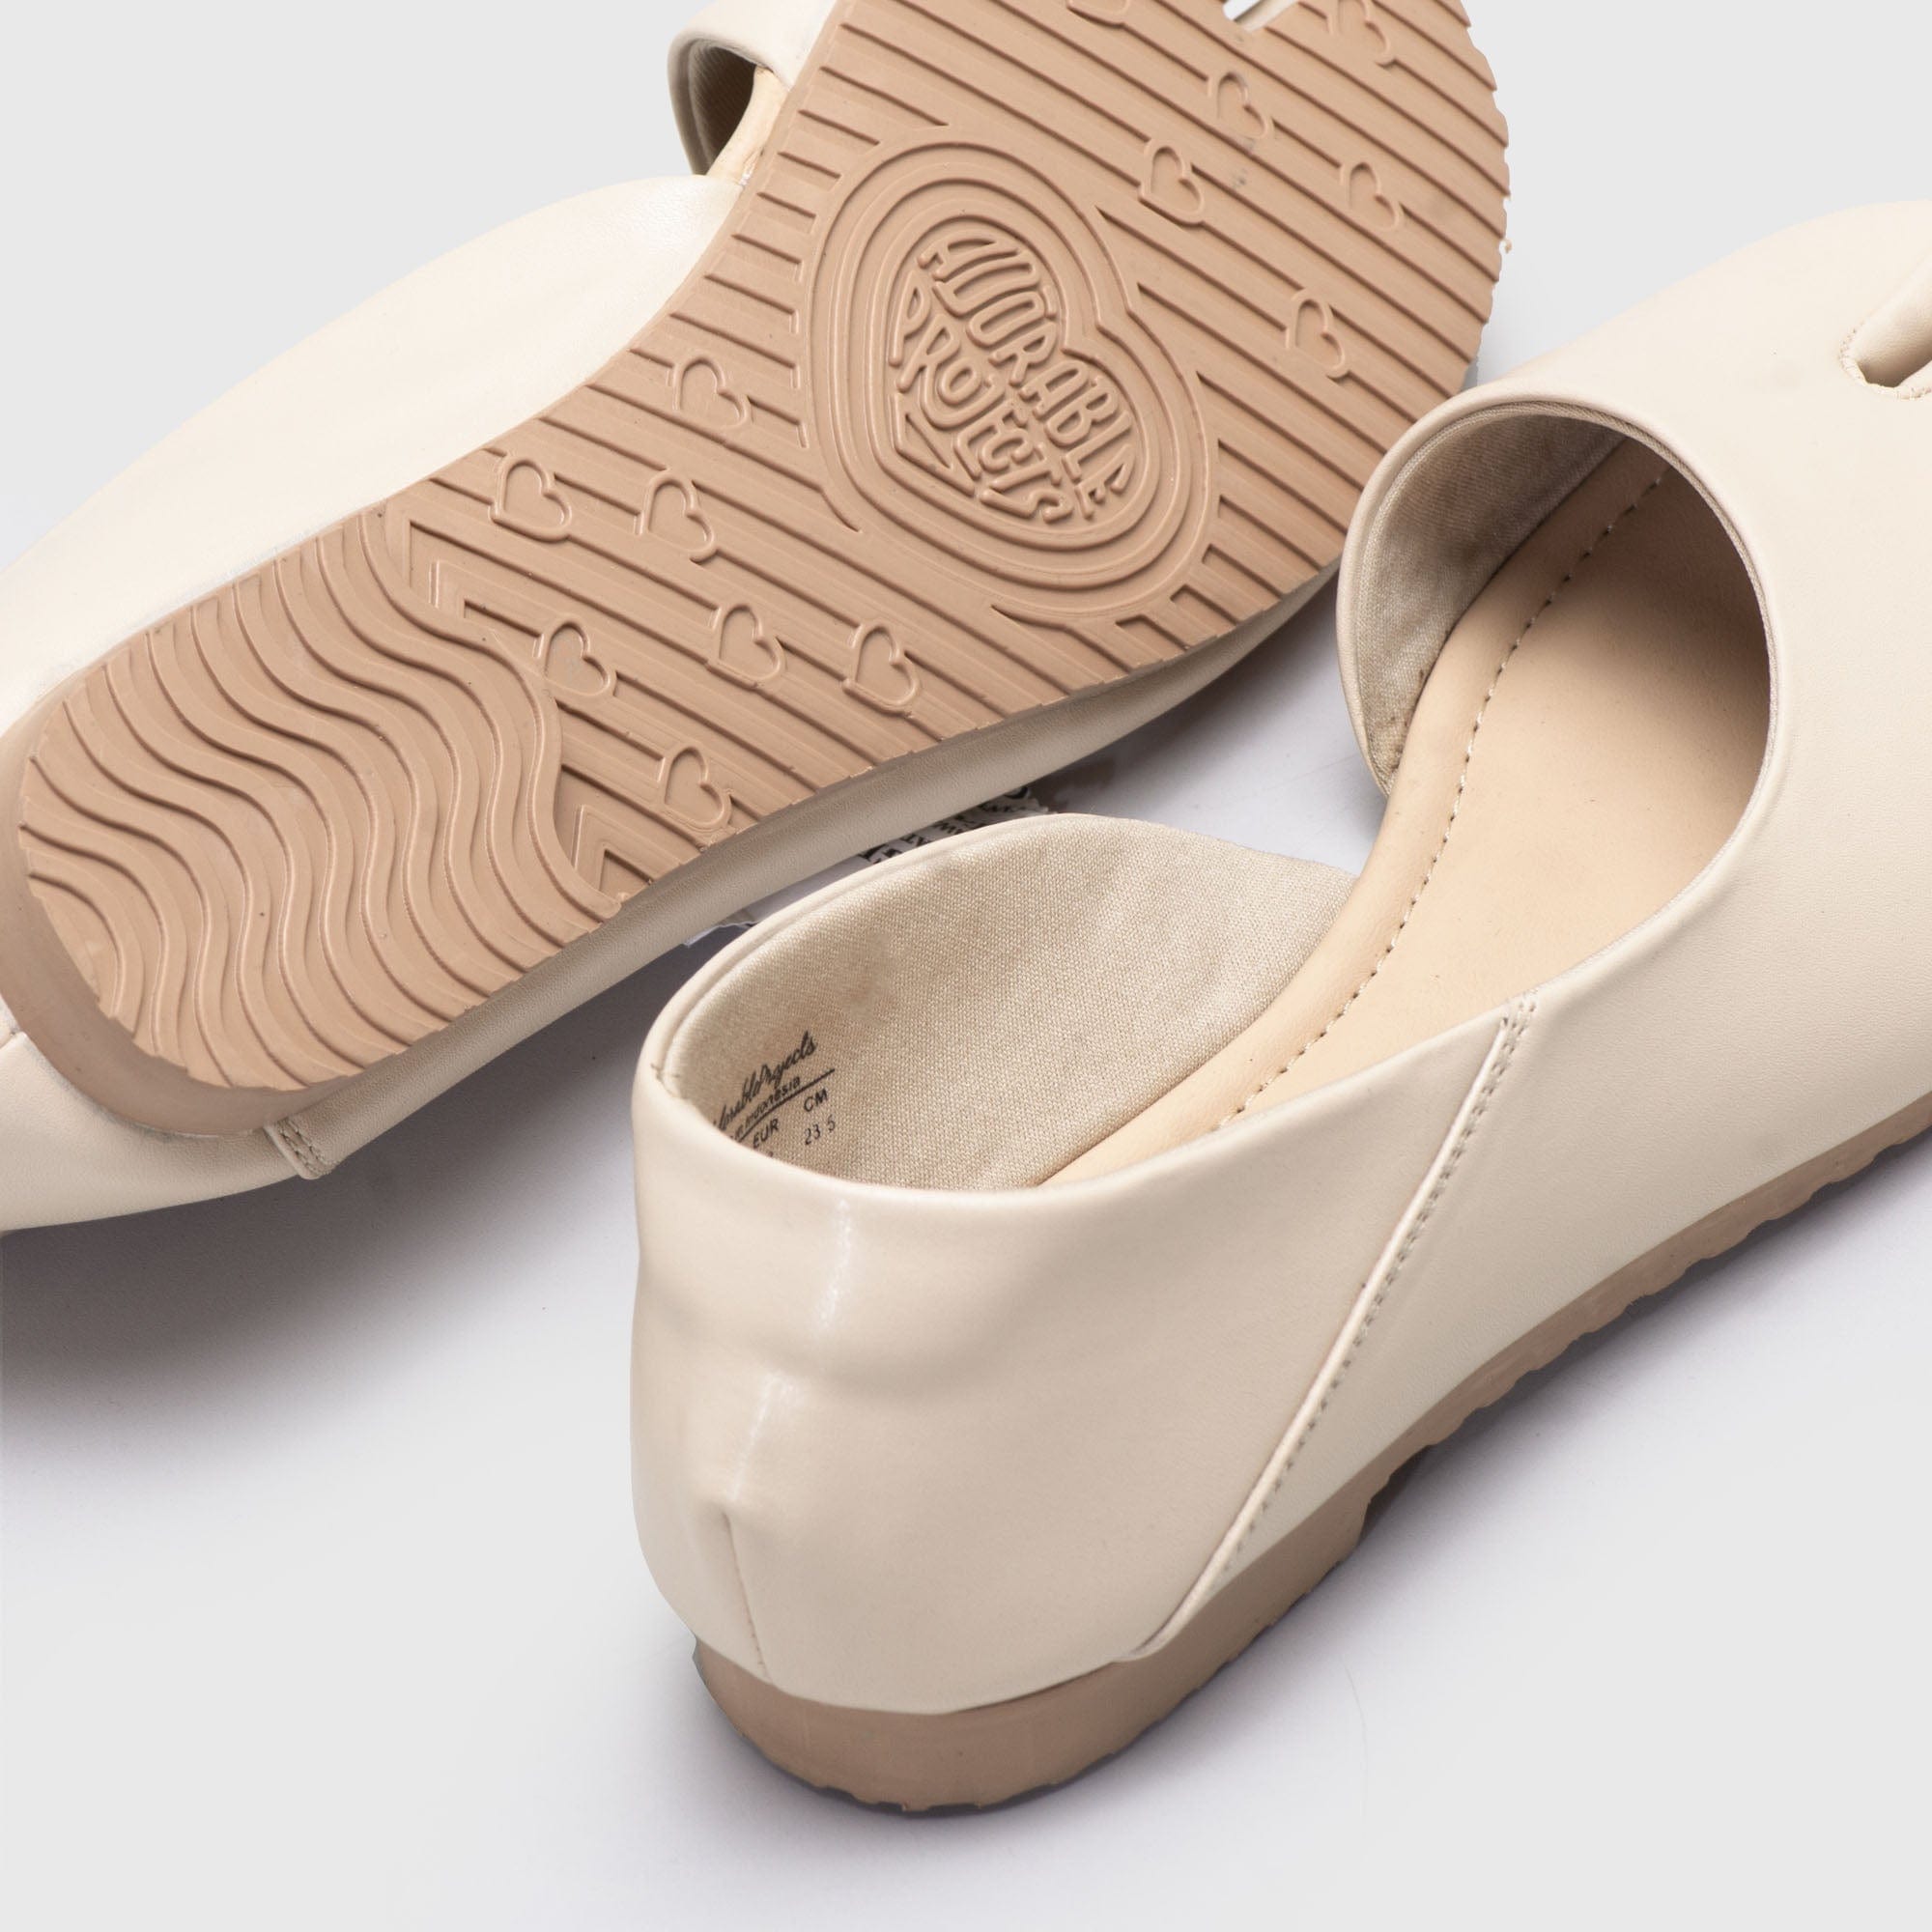 Adorable Projects Official Adorableprojects - Lulula Flat Shoes Cream - Sepatu Tabi